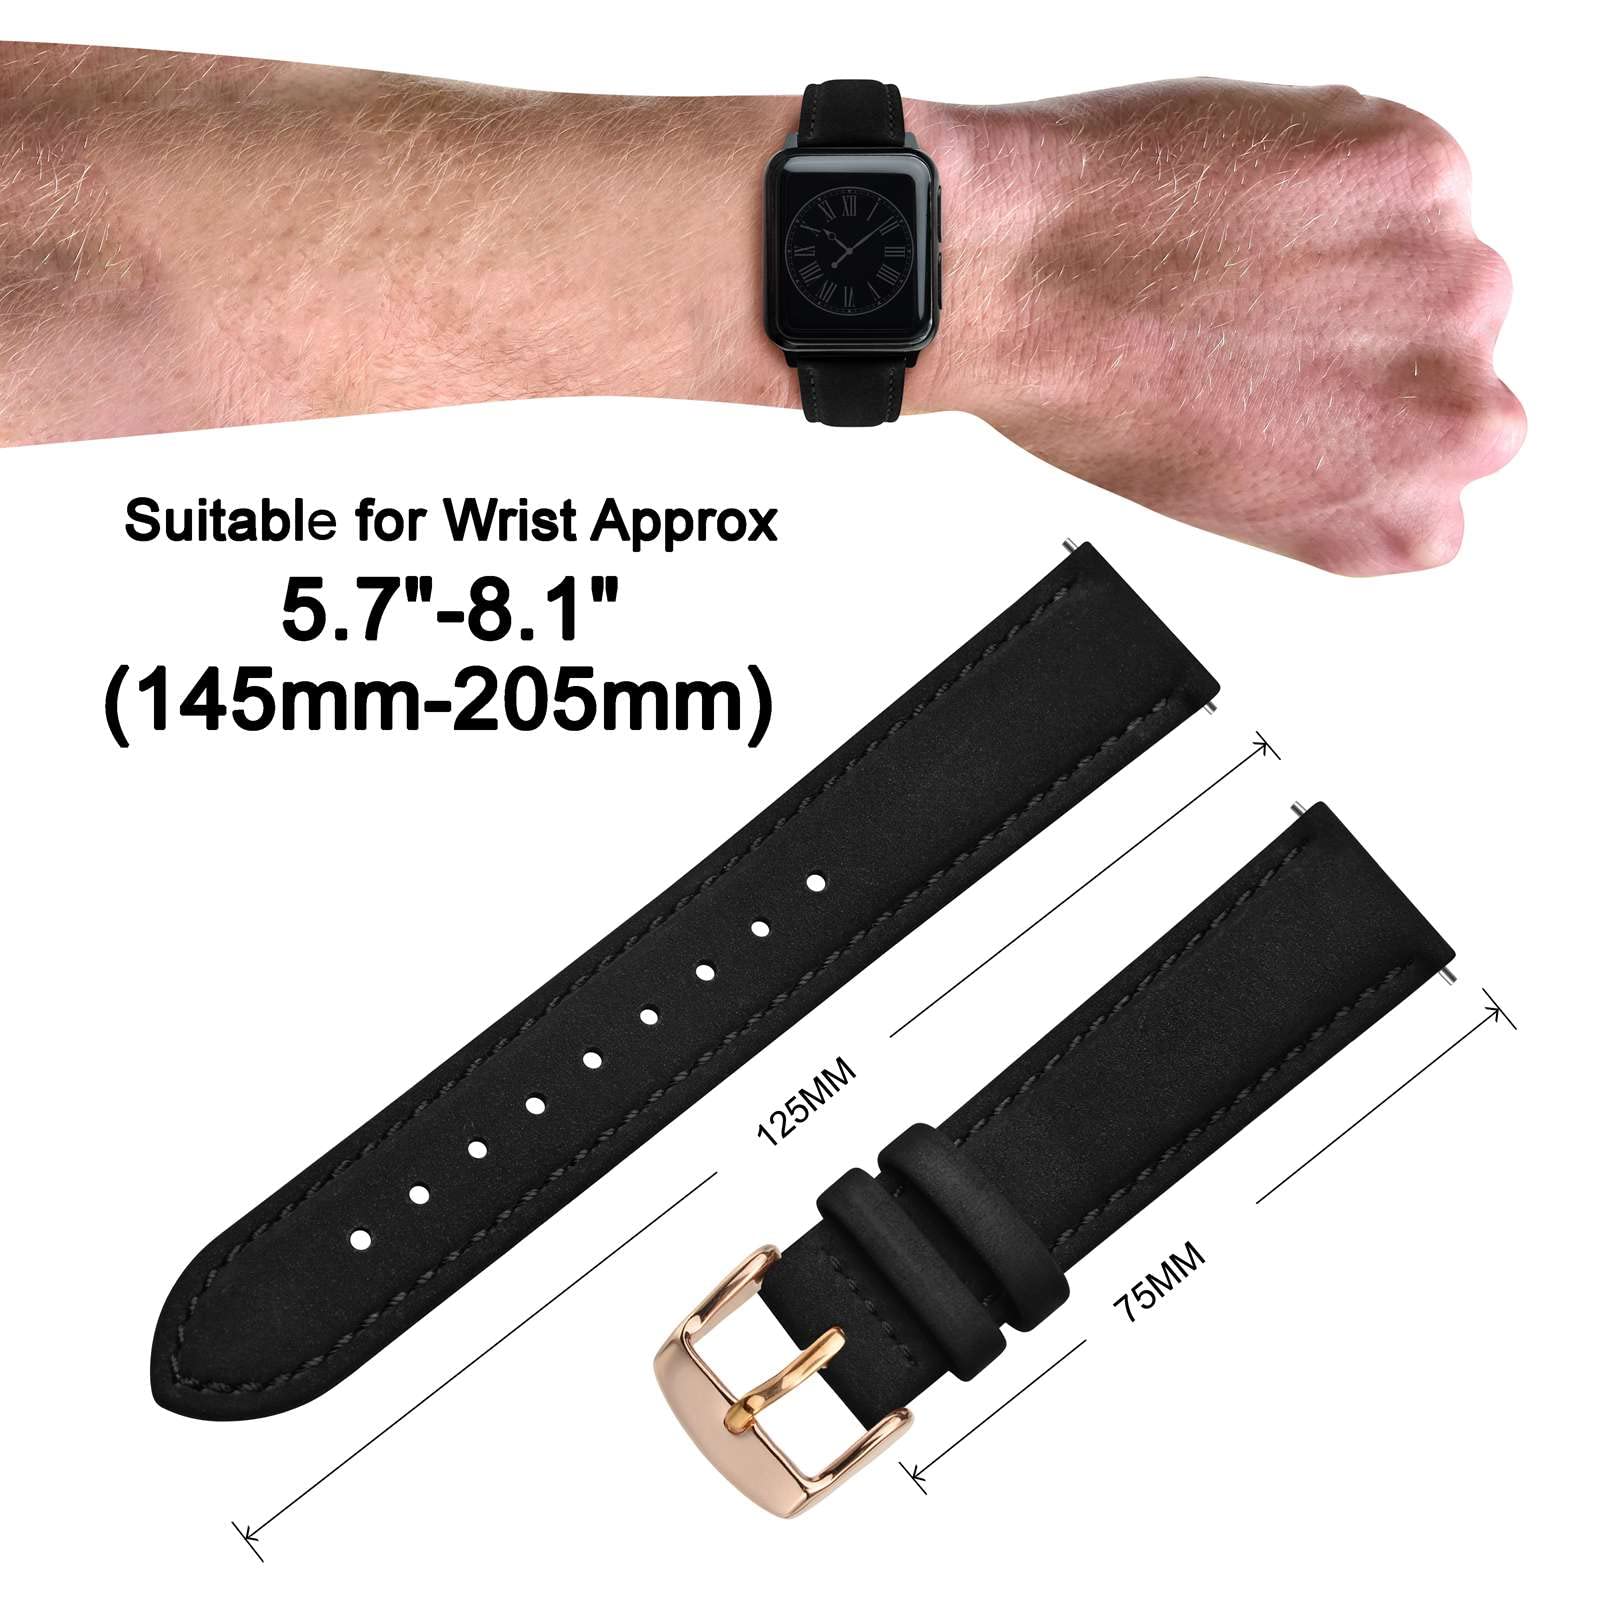 ANNEFIT 18mm Watch Band with Stainless Steel Rose Gold Buckle, Vintage Nubuck Suede Soft Leather watch Strap with Quick Release (Black)